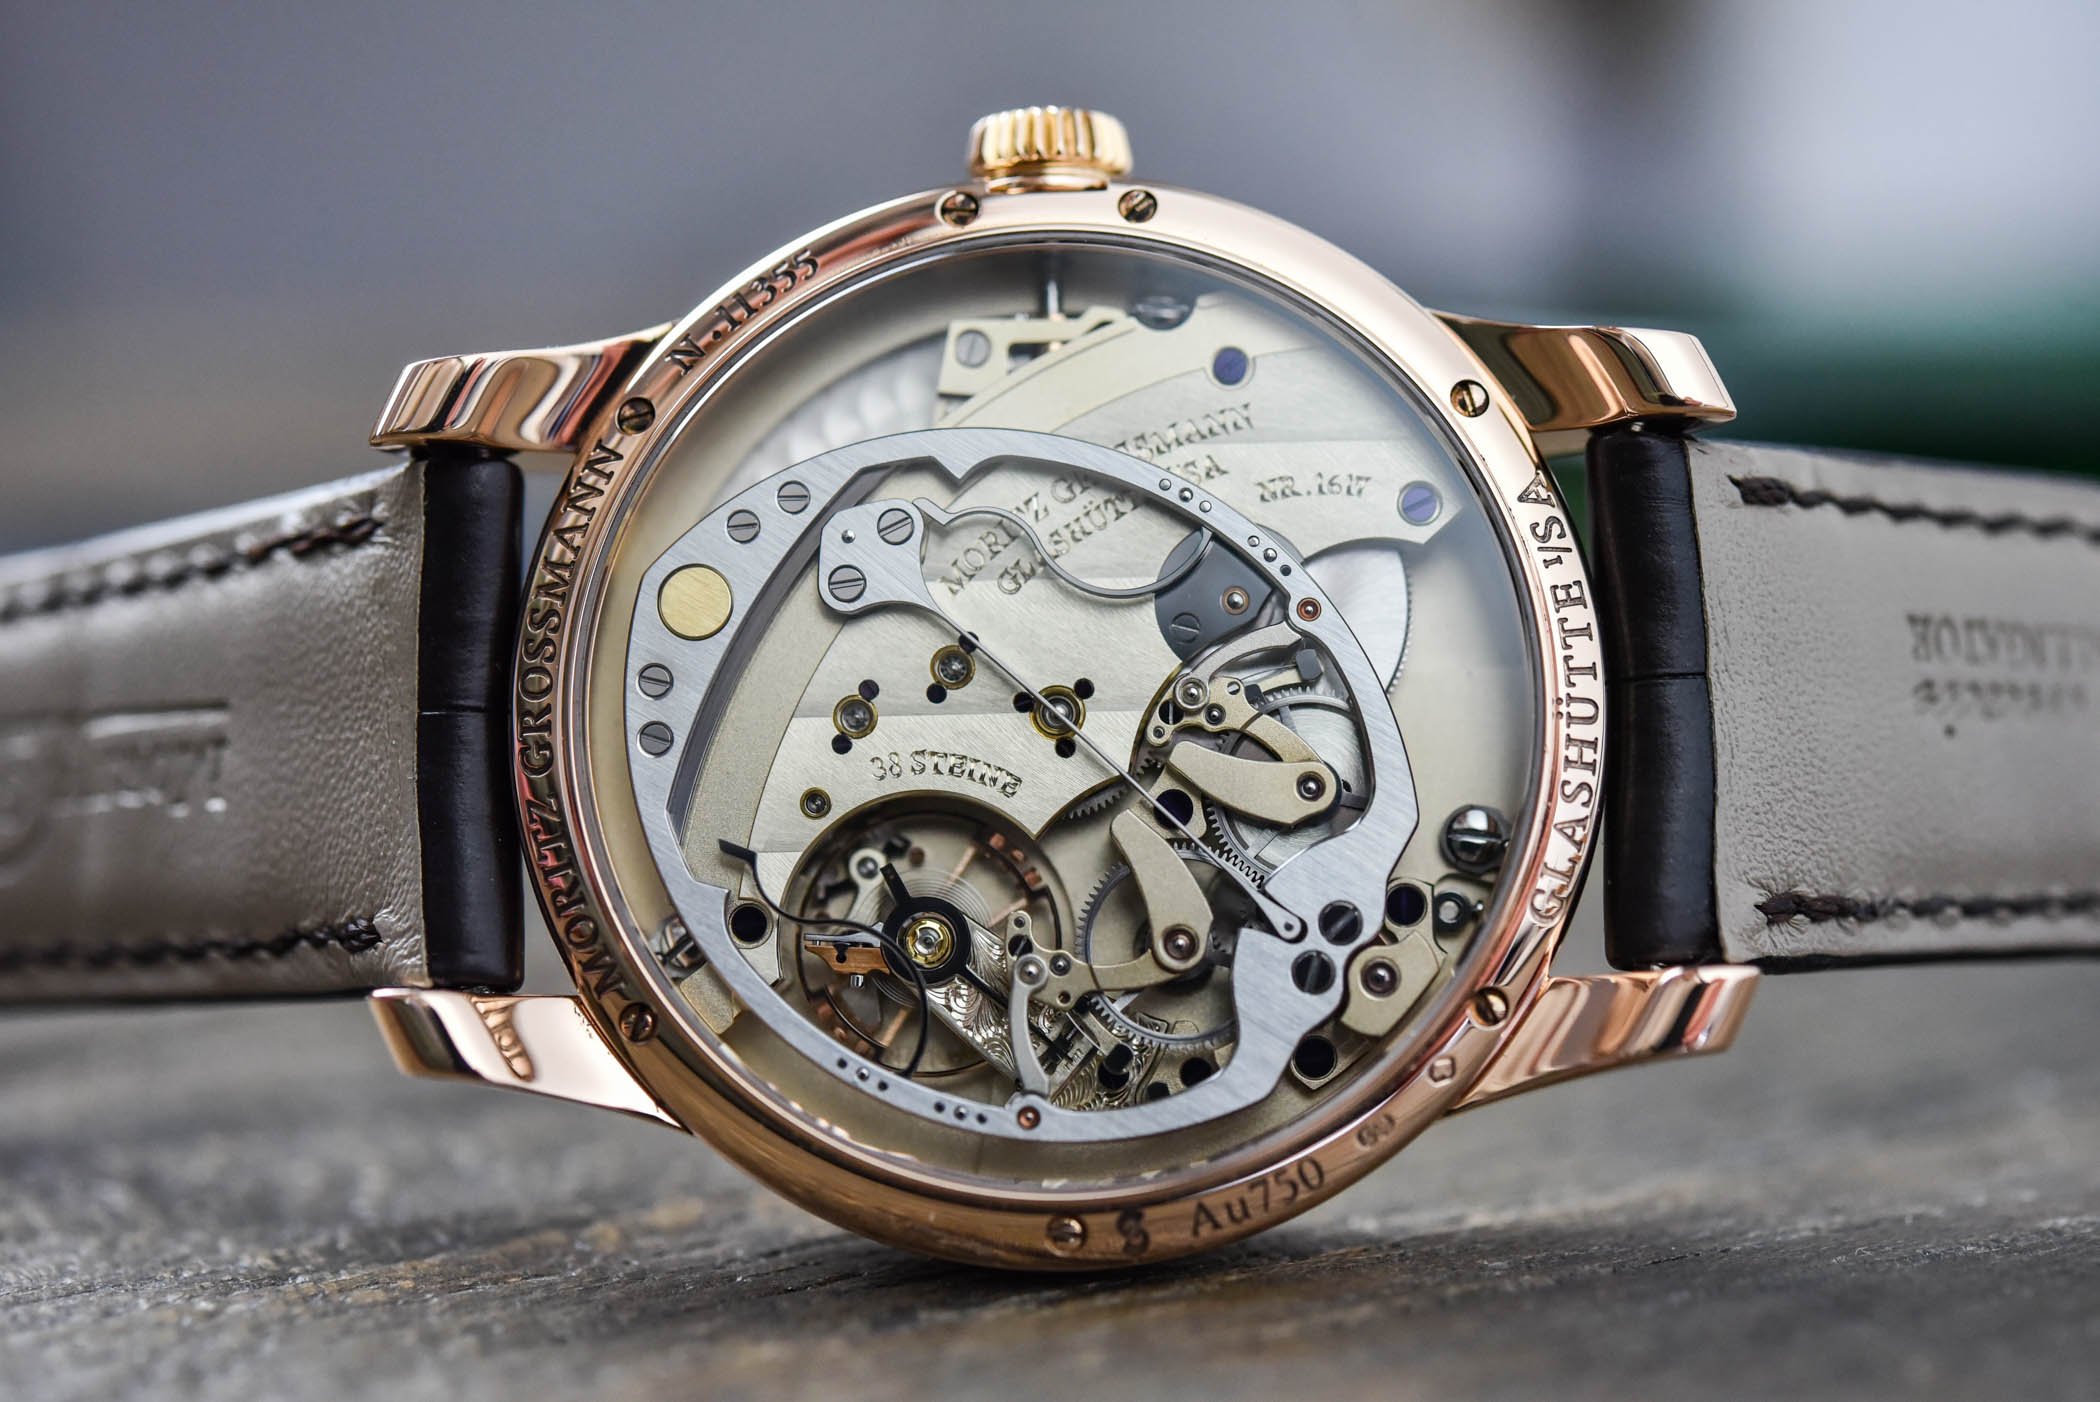 Buying Guide: Seven Appealing Watches, Each With a Different Winding System